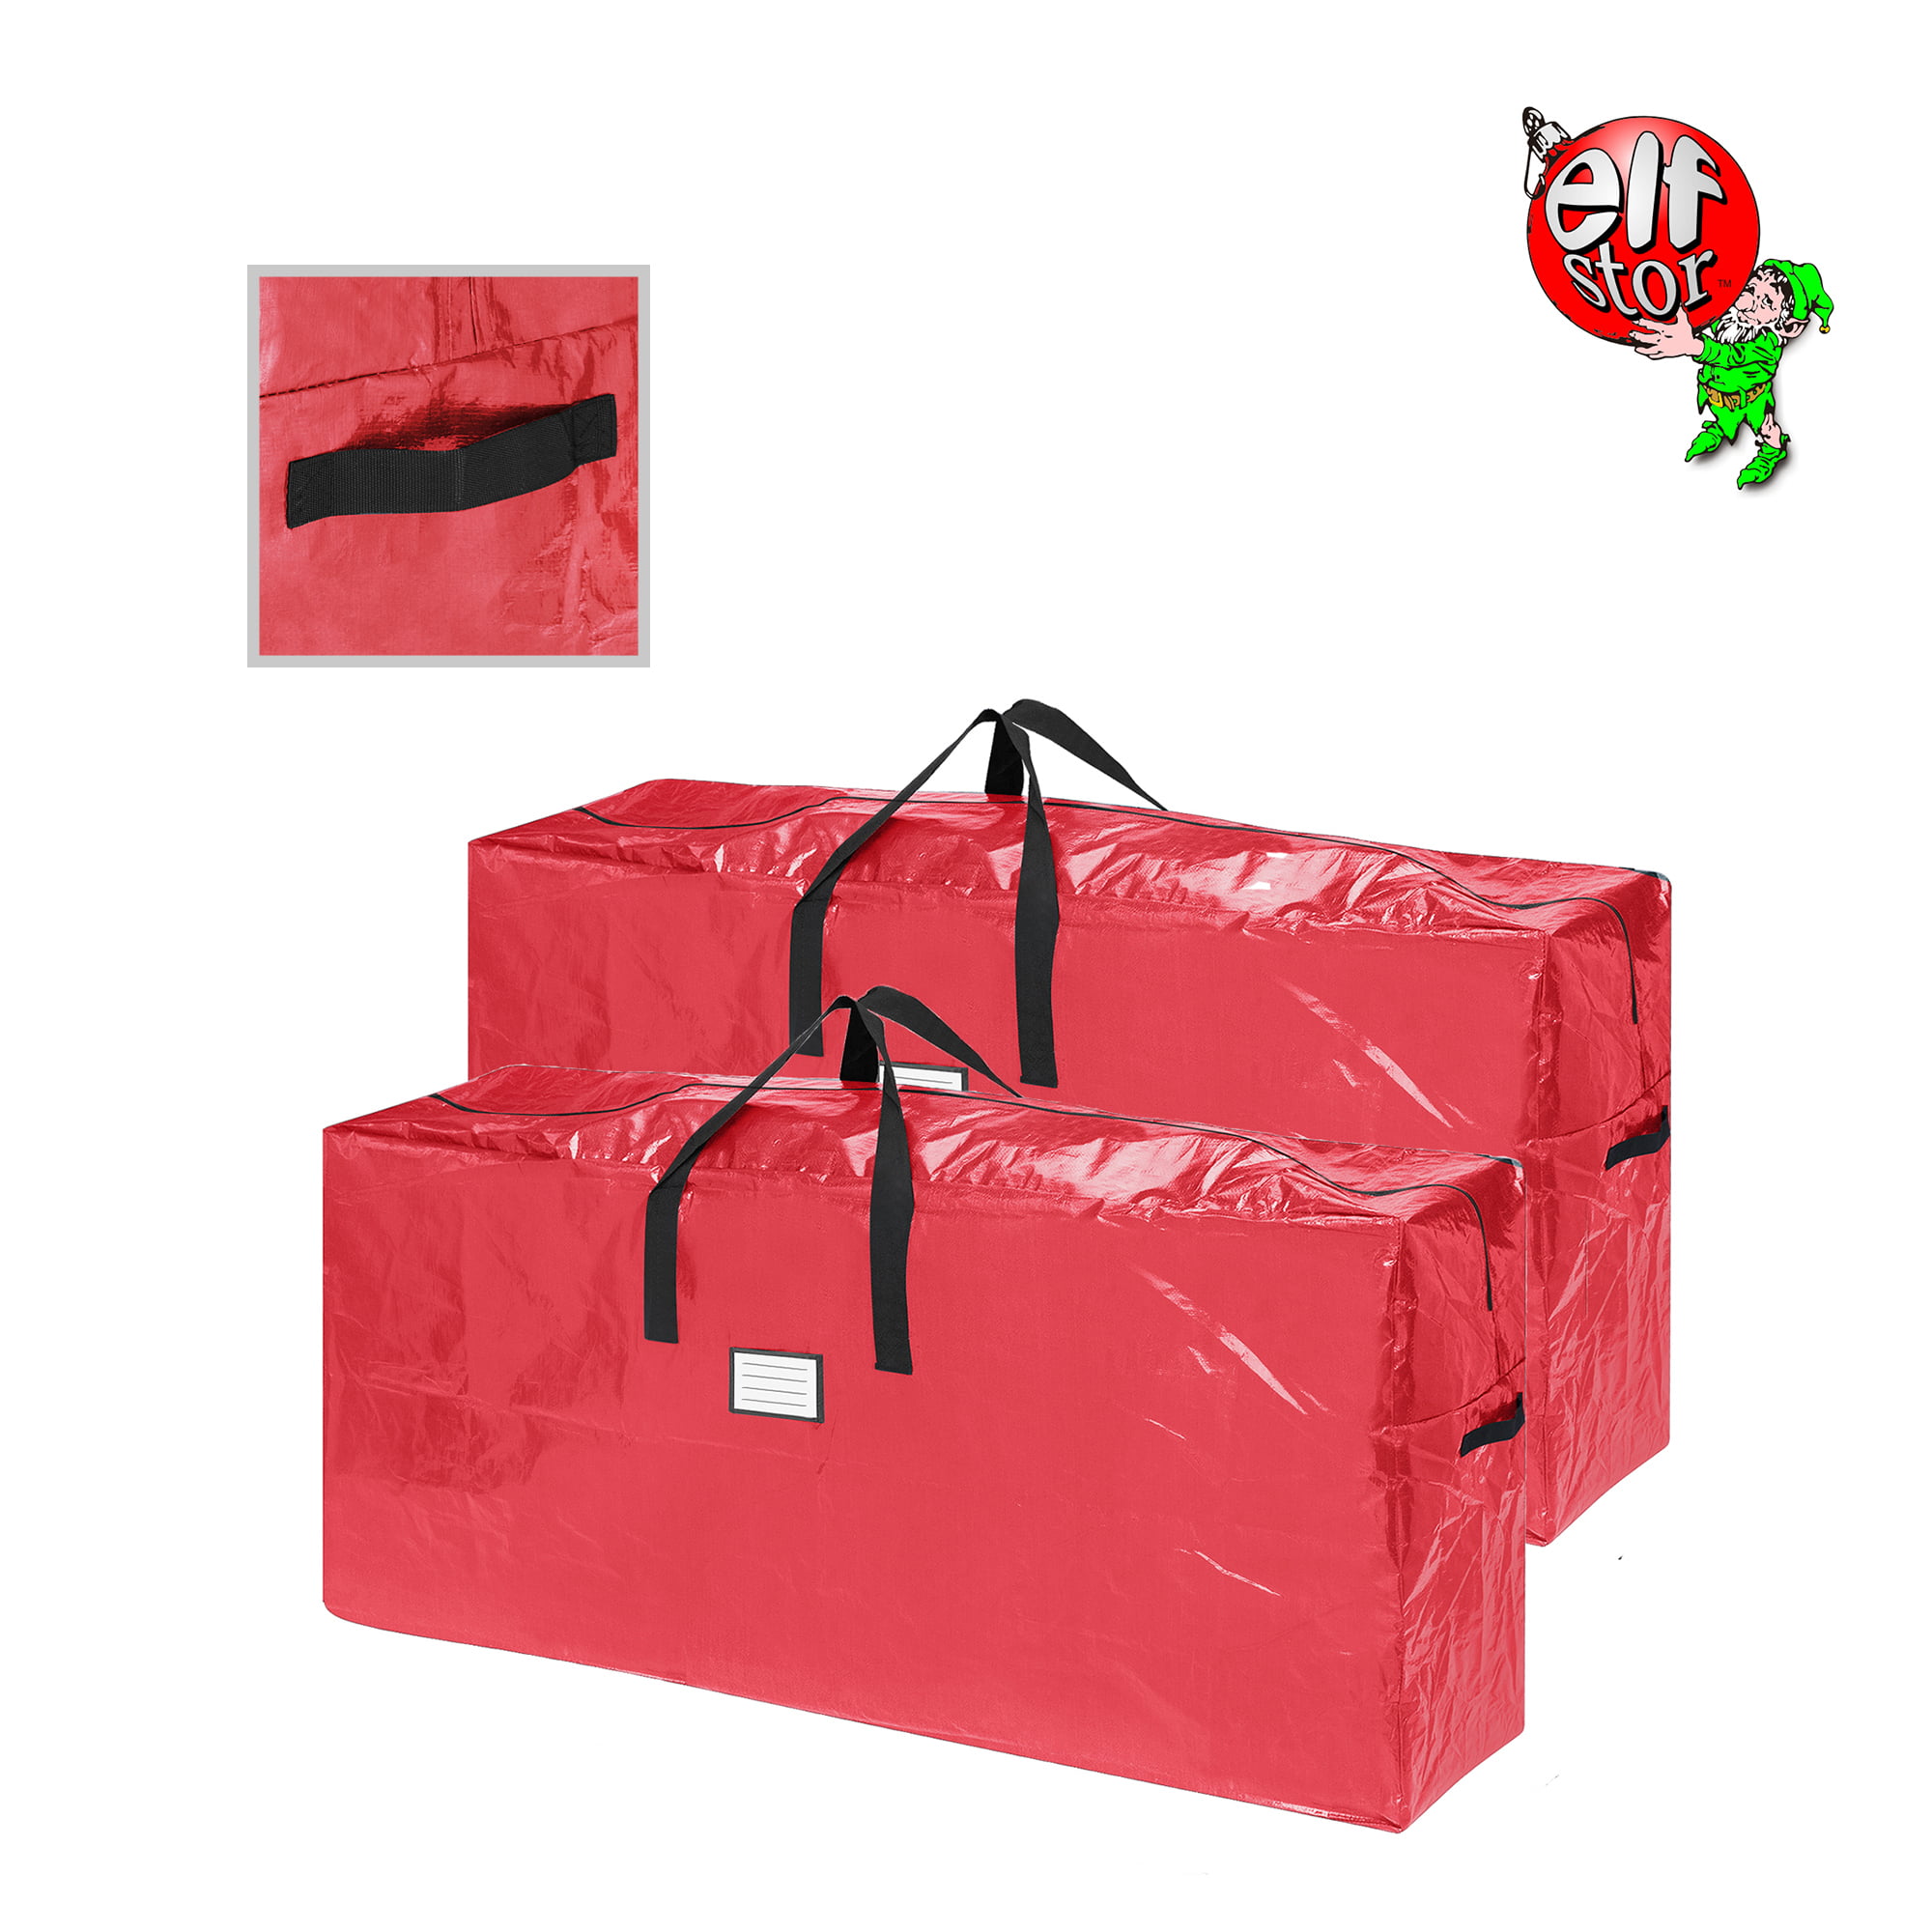 Christmas Bag Extra Large for up to 9 Ft Tree Elf Stor 83-DT5517 2-Pack Red